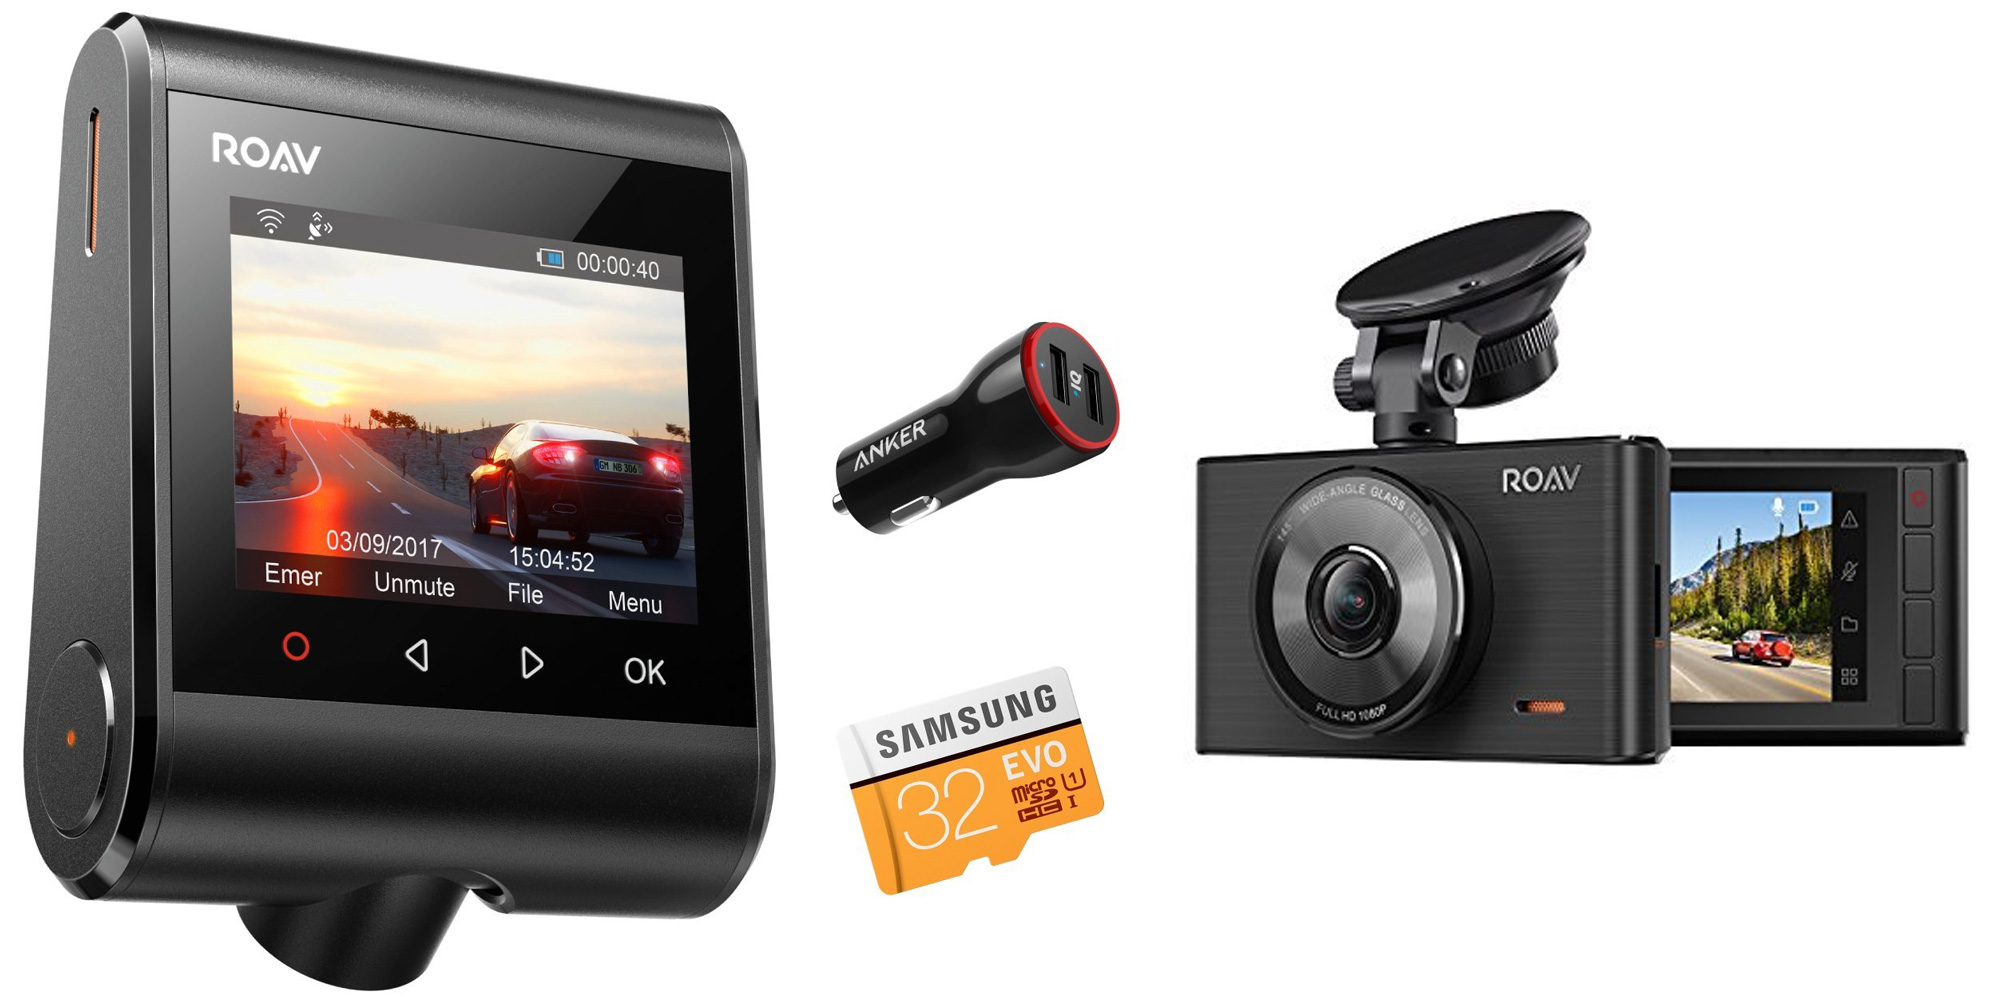 Anker's Roav line of dash cams are on sale right now from $45 shipped